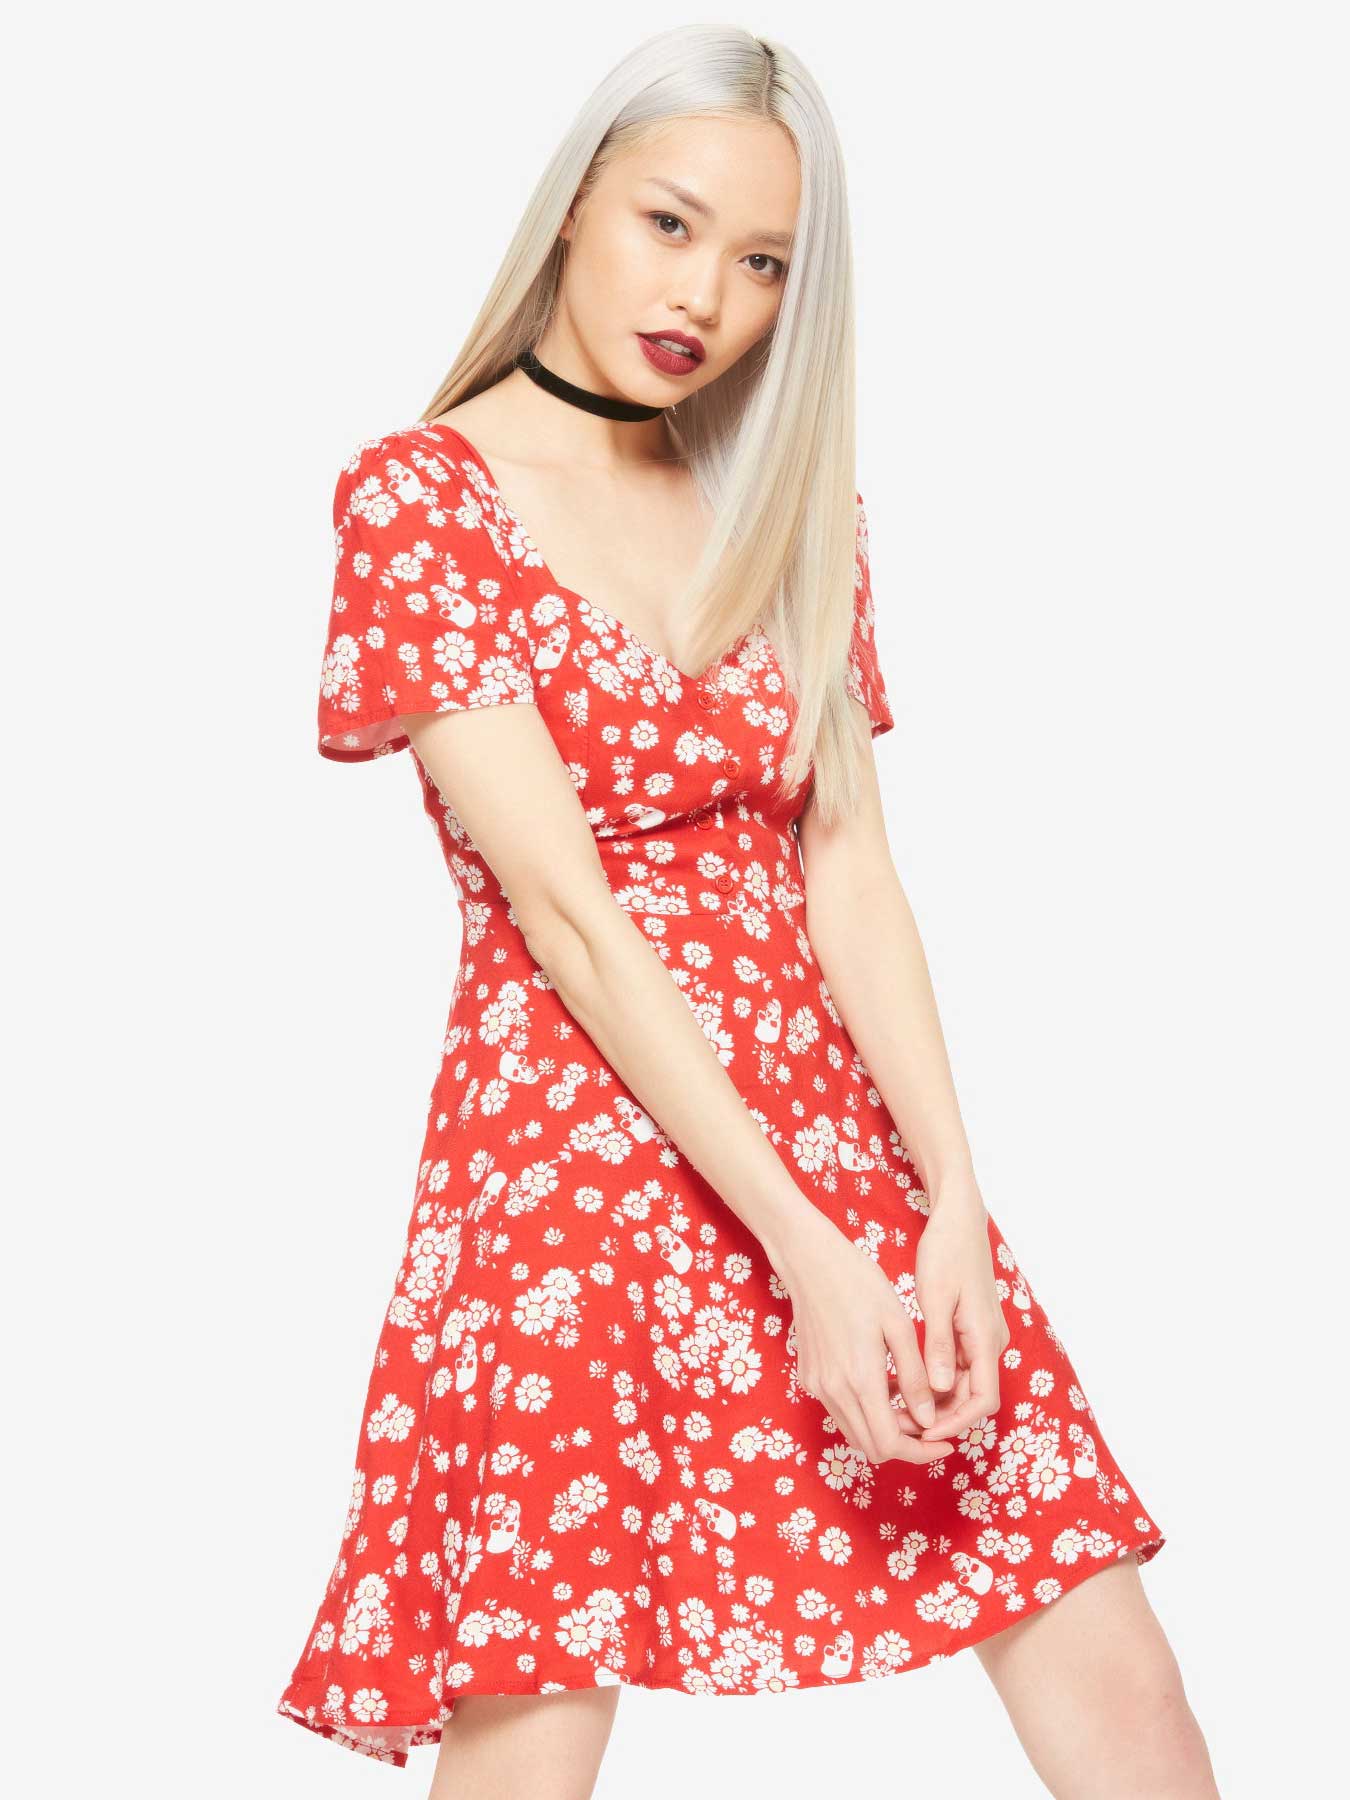 red-orange summer dress with white skulls and flowers